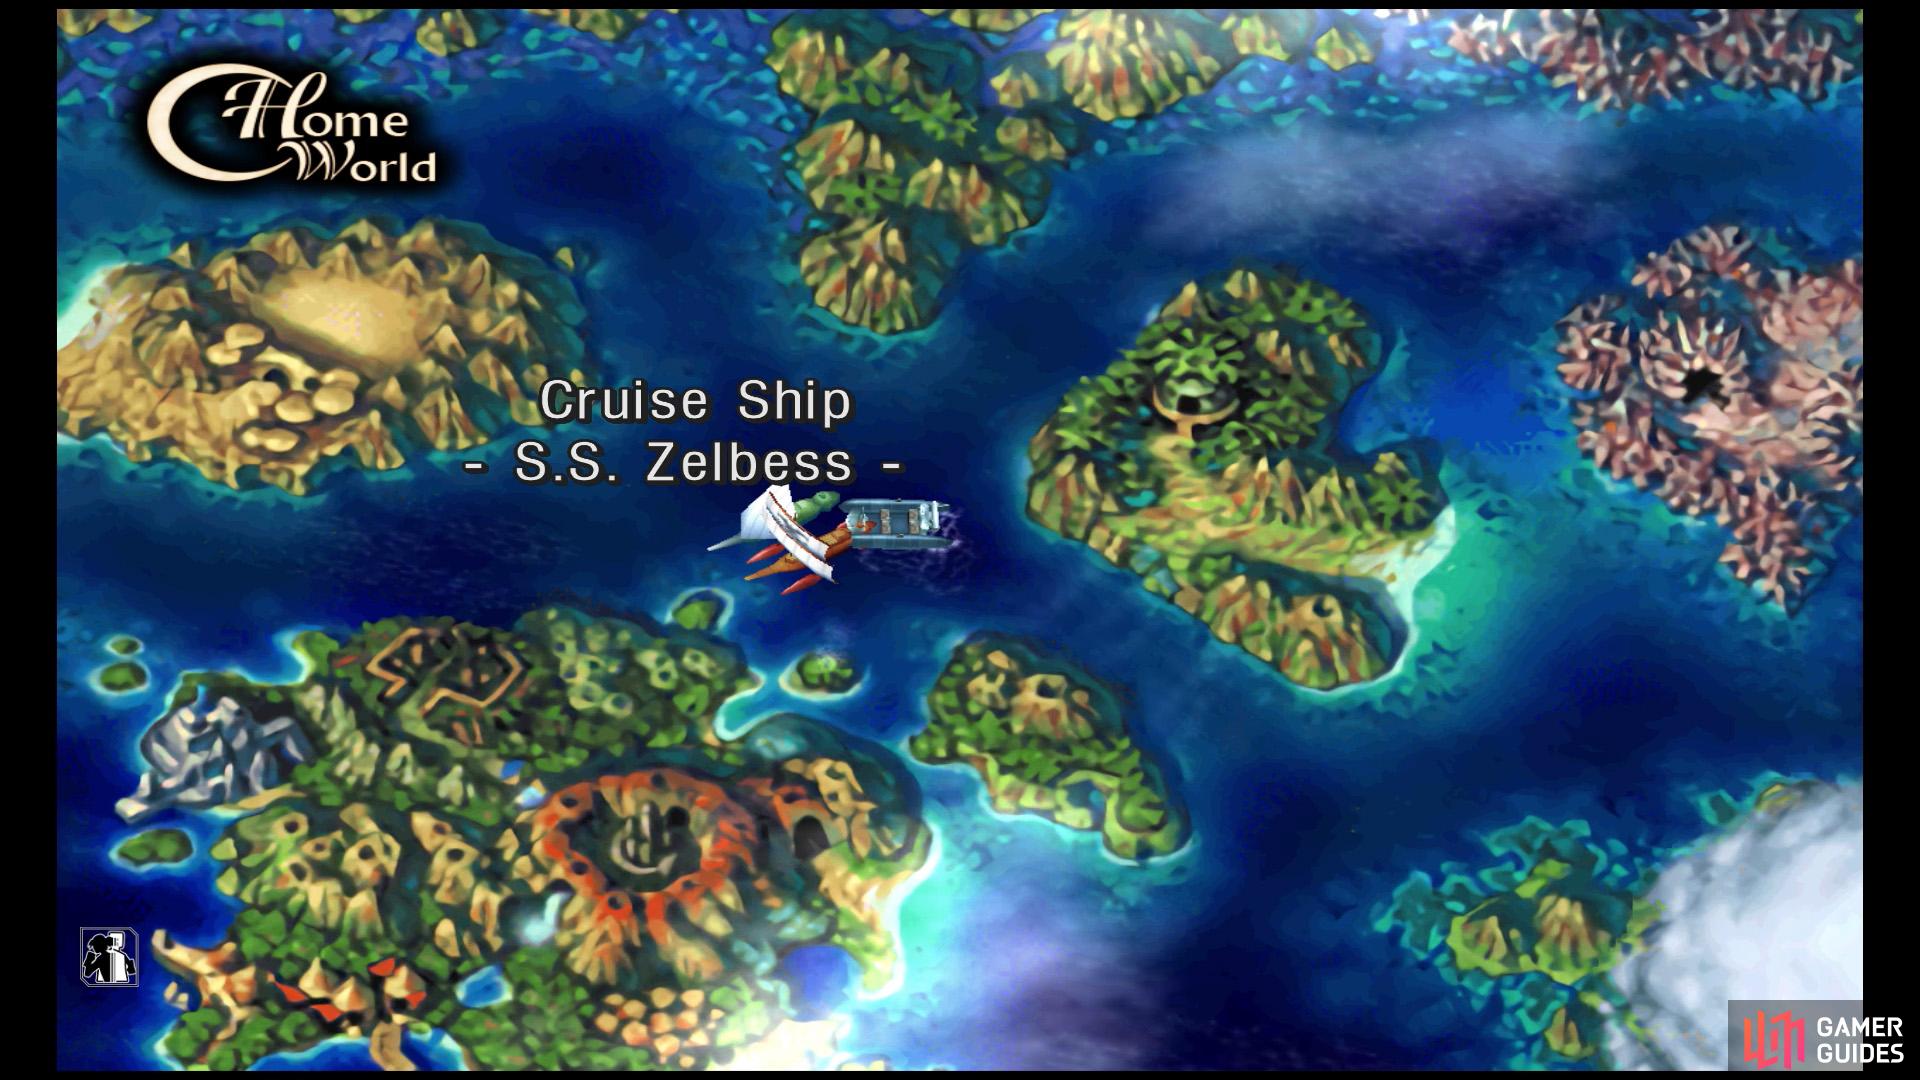 Set sail for S.S. Zelbess in Home World.